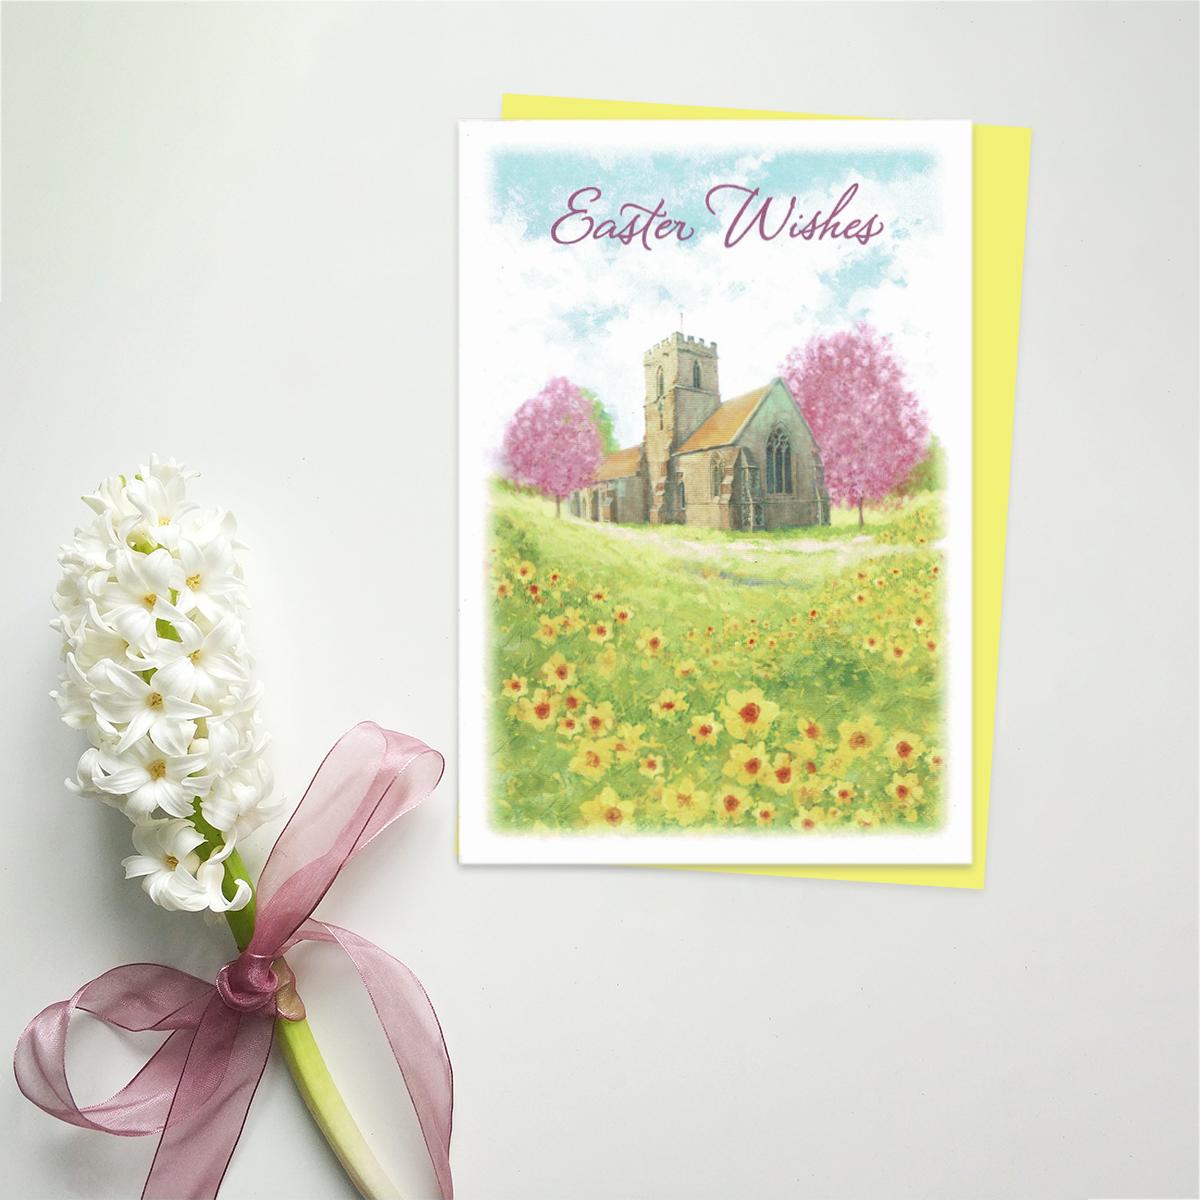 Easter Wishes Greeting Card Alongside Its Yellow Envelope